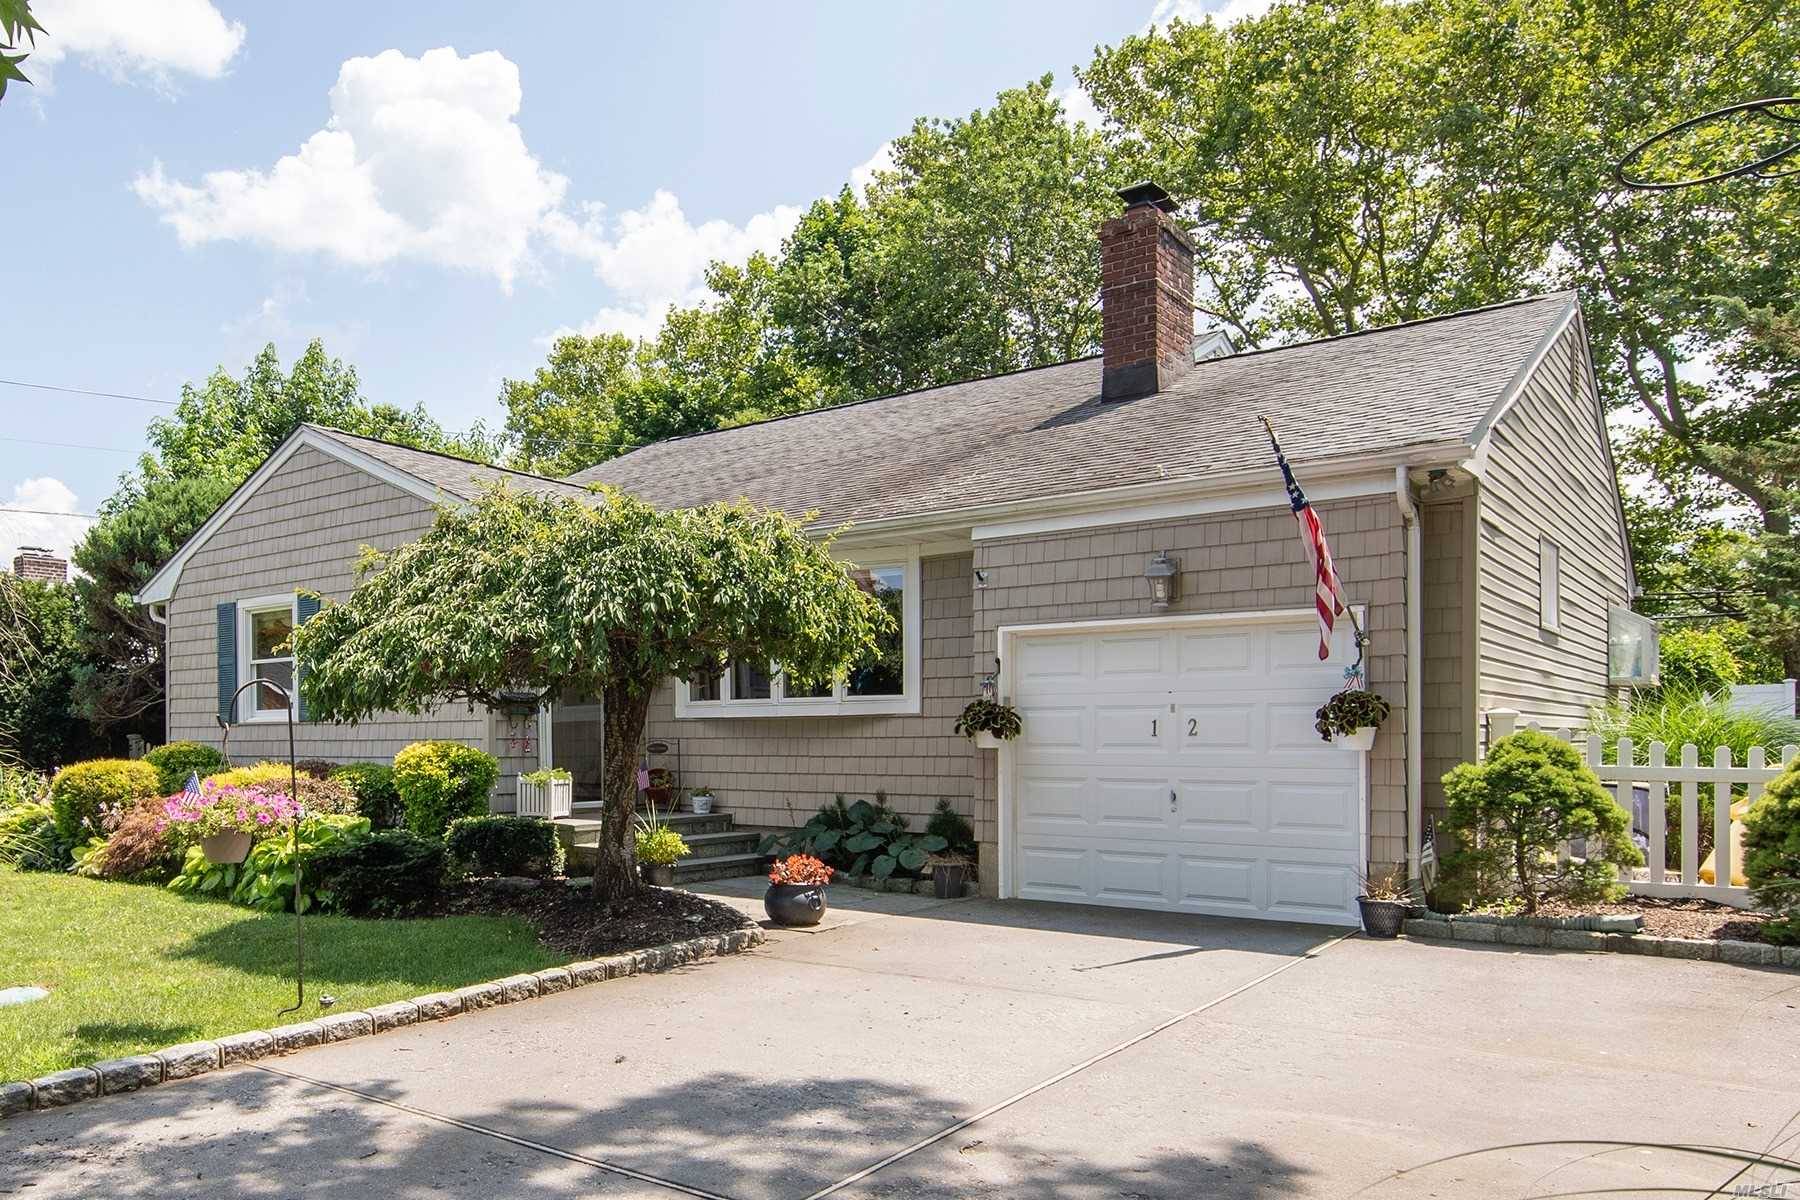 Move Right Into This Mid Block Expanded Ranch In Award Winning Syosset Schools.